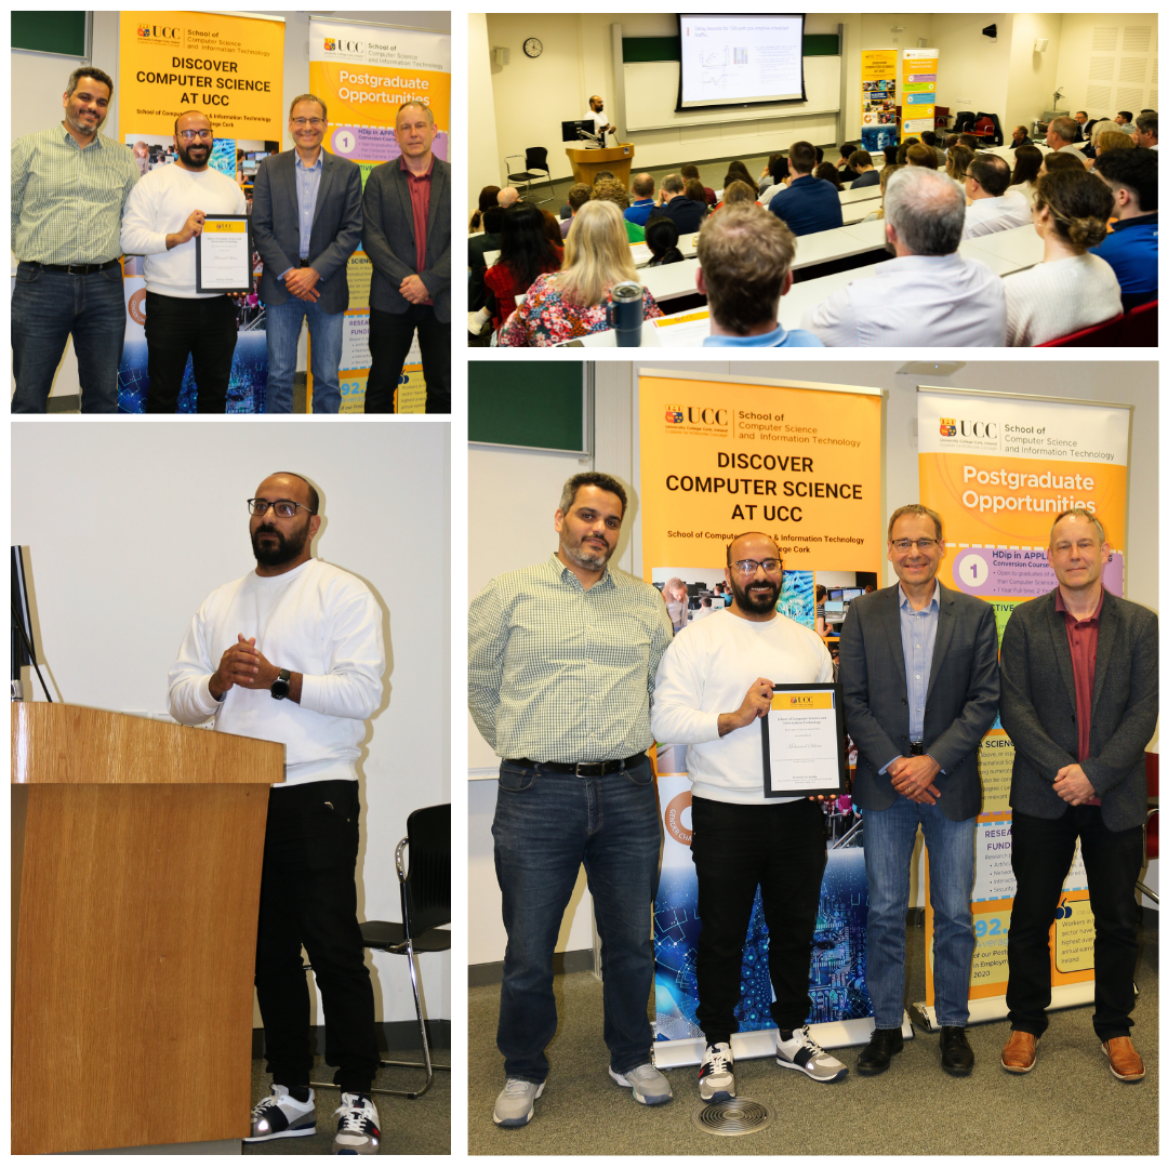 Photo collage of photos taken during the Best Paper Awards. The winner, Mohamed Seliem, is pictured giving his presentation on his winning papaer, 